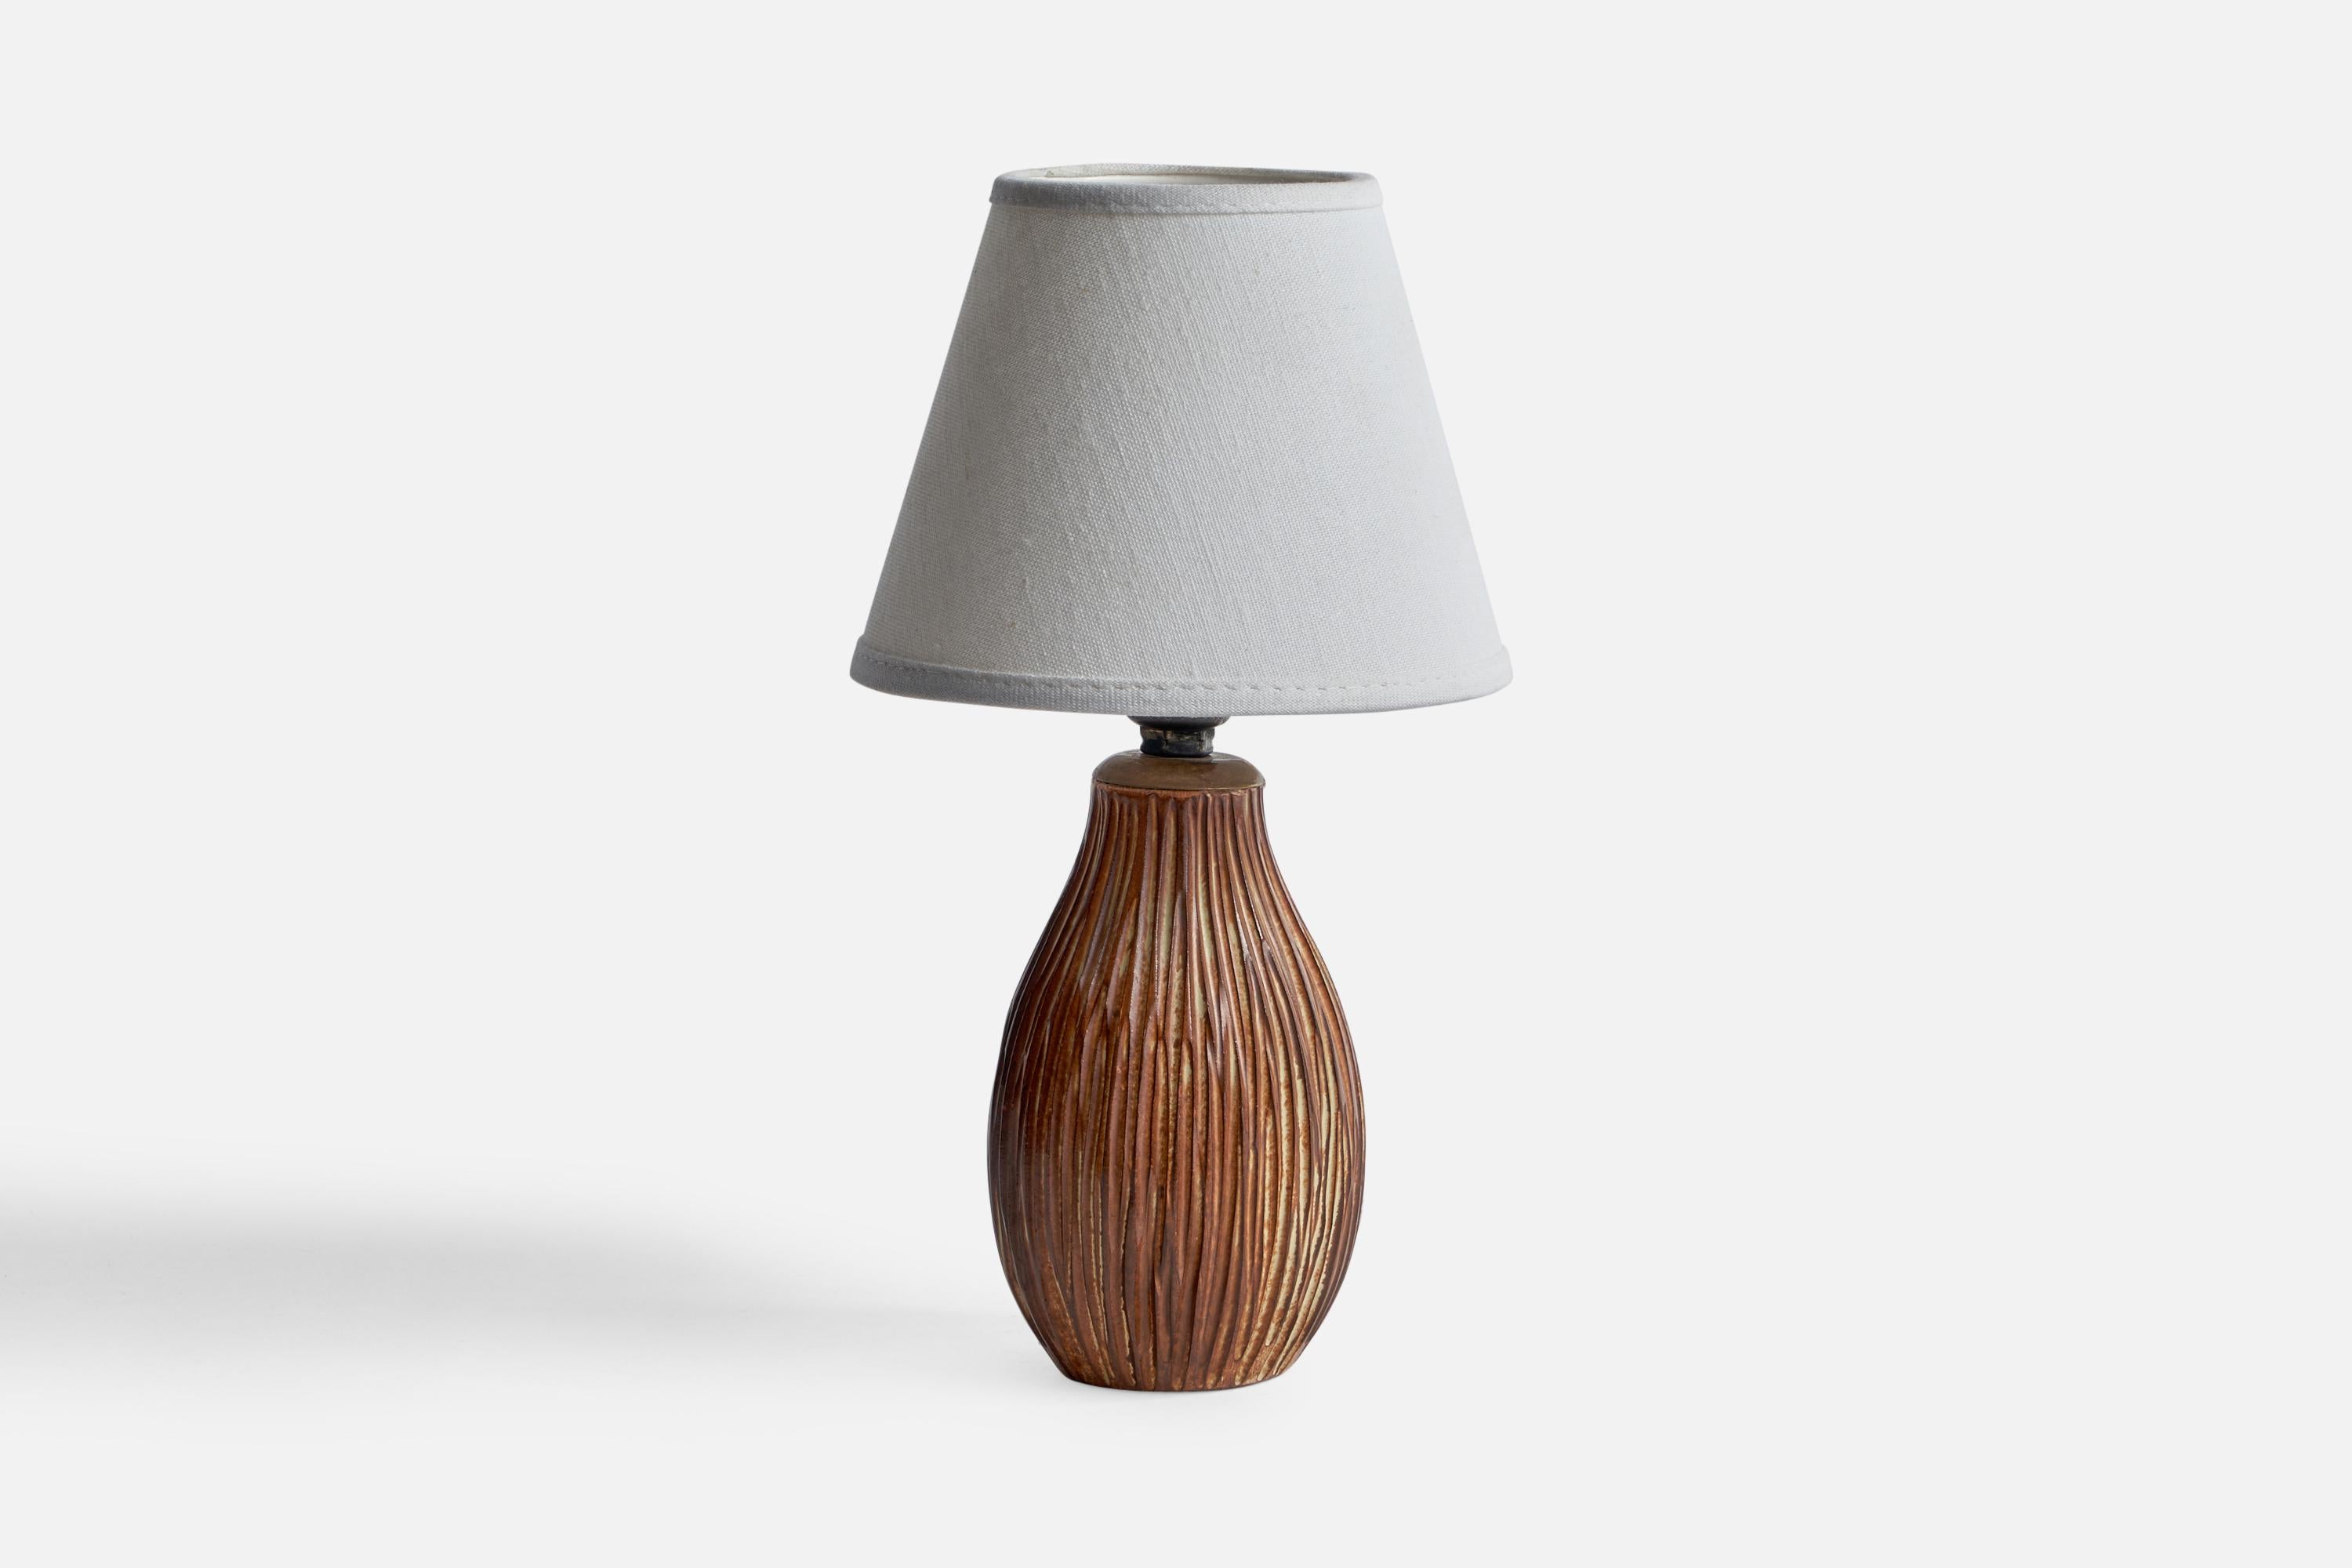 A brown-glazed incised earthenware table lamp designed and produced in Sweden, 1950s.

Dimensions of Lamp (inches): 7.8” H x 3.3” Diameter
Dimensions of Shade (inches): 3” Top Diameter x 5.75” Bottom Diameter x 4.5” H
Dimensions of Lamp with Shade